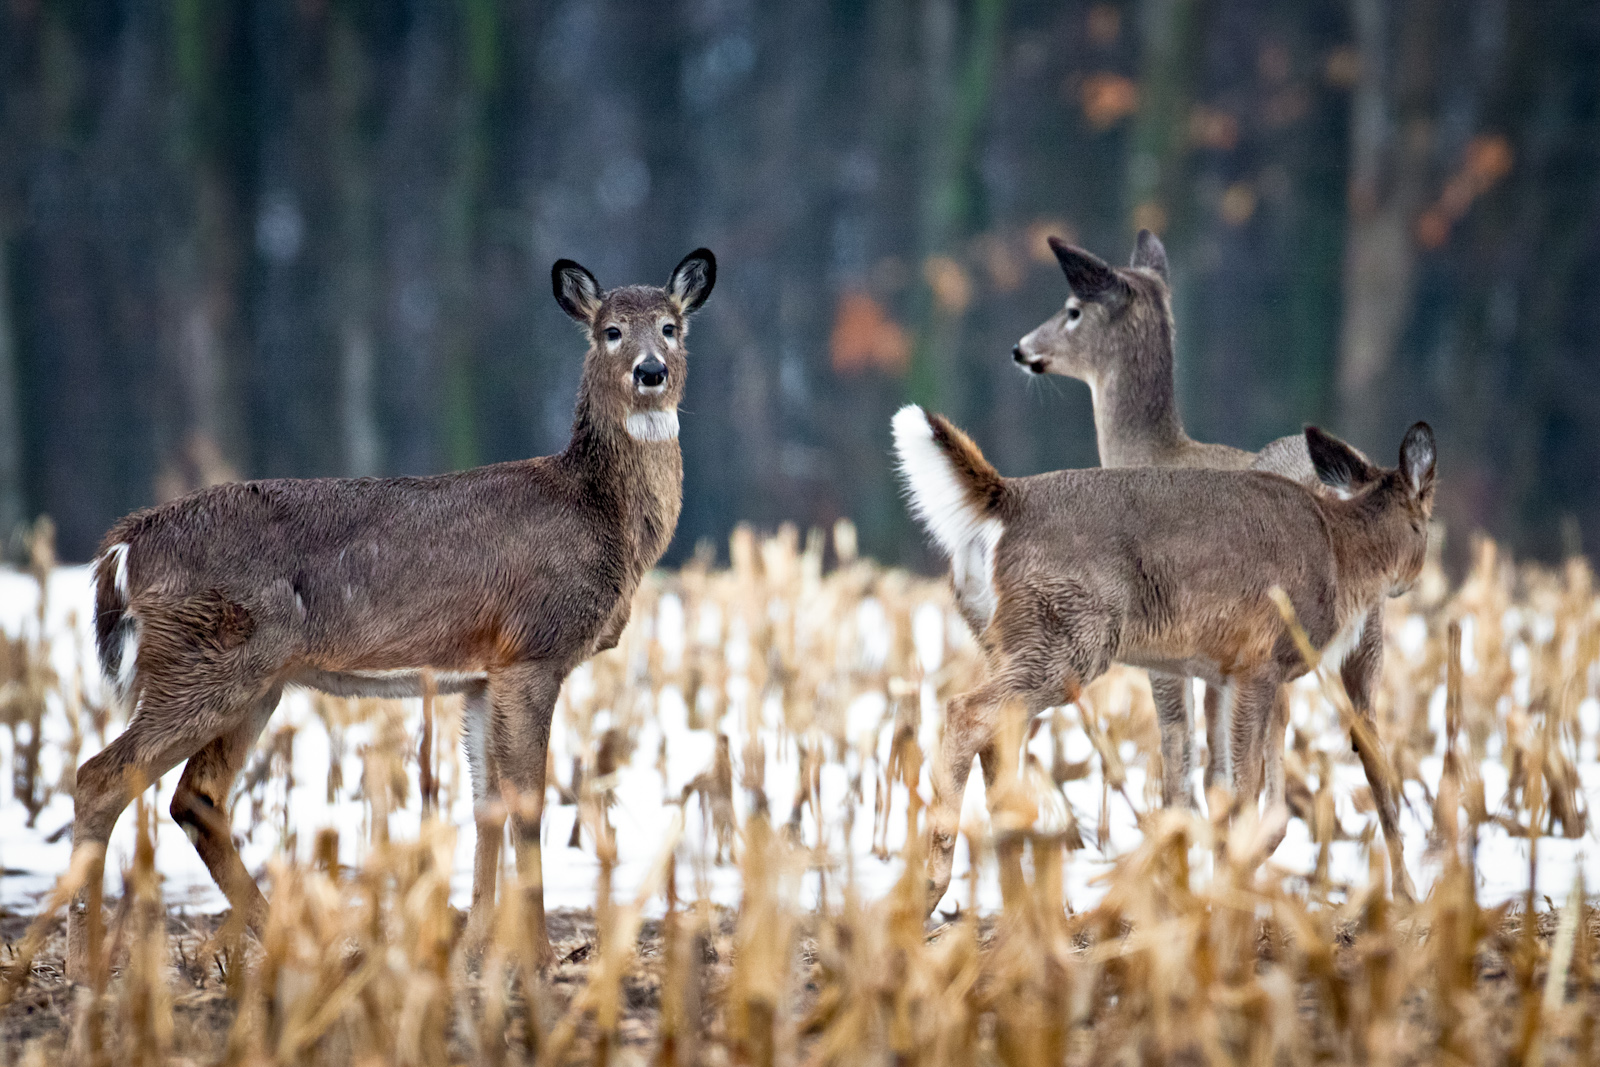 Northern Wisconsin County Adopts Ordinance To Regulate Deer Farms